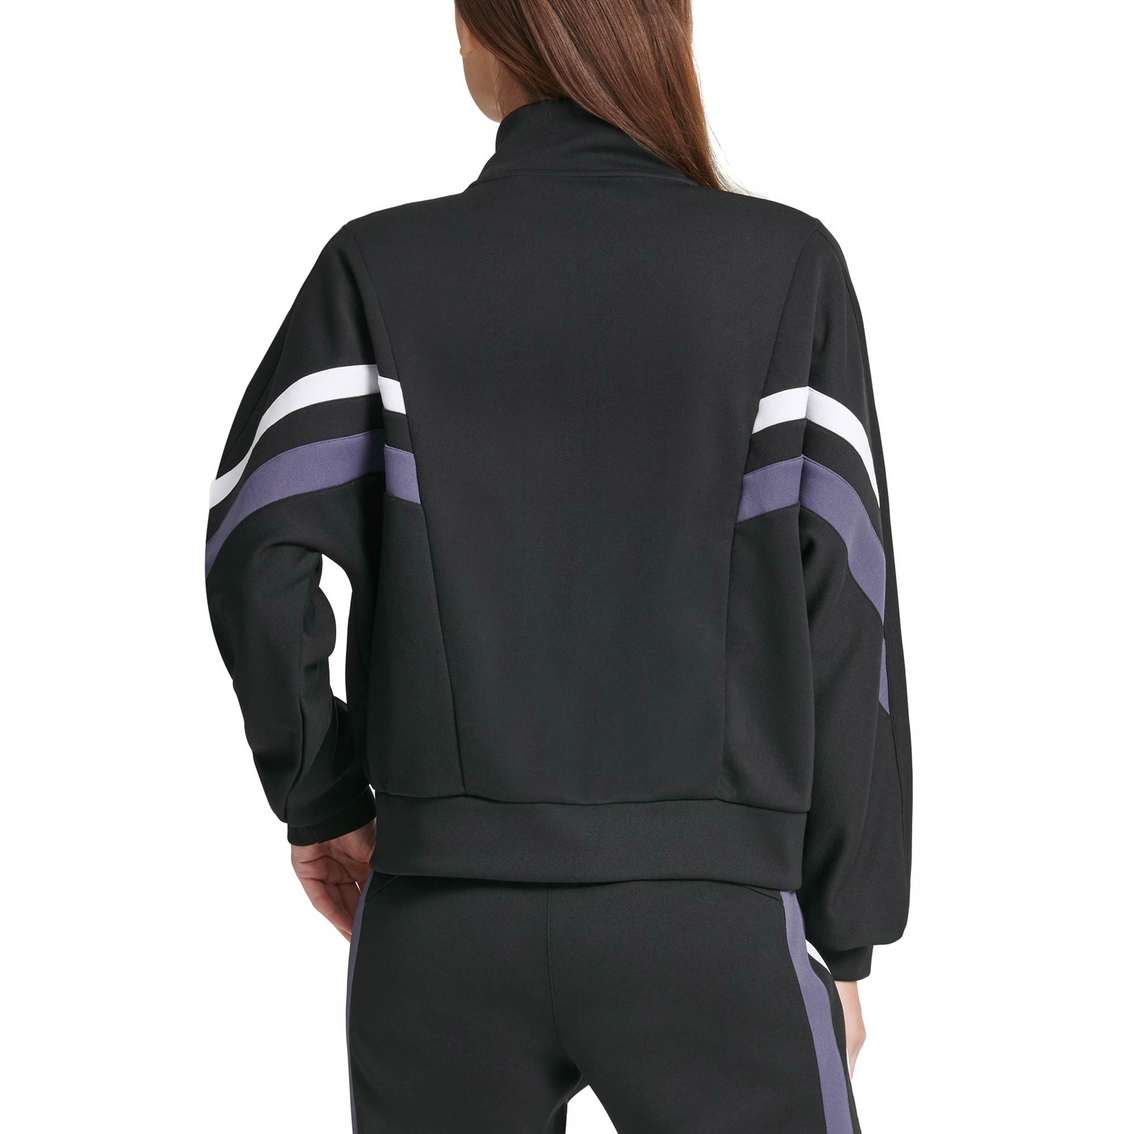 DKNY Colorblock Track Jacket - Image 2 of 3